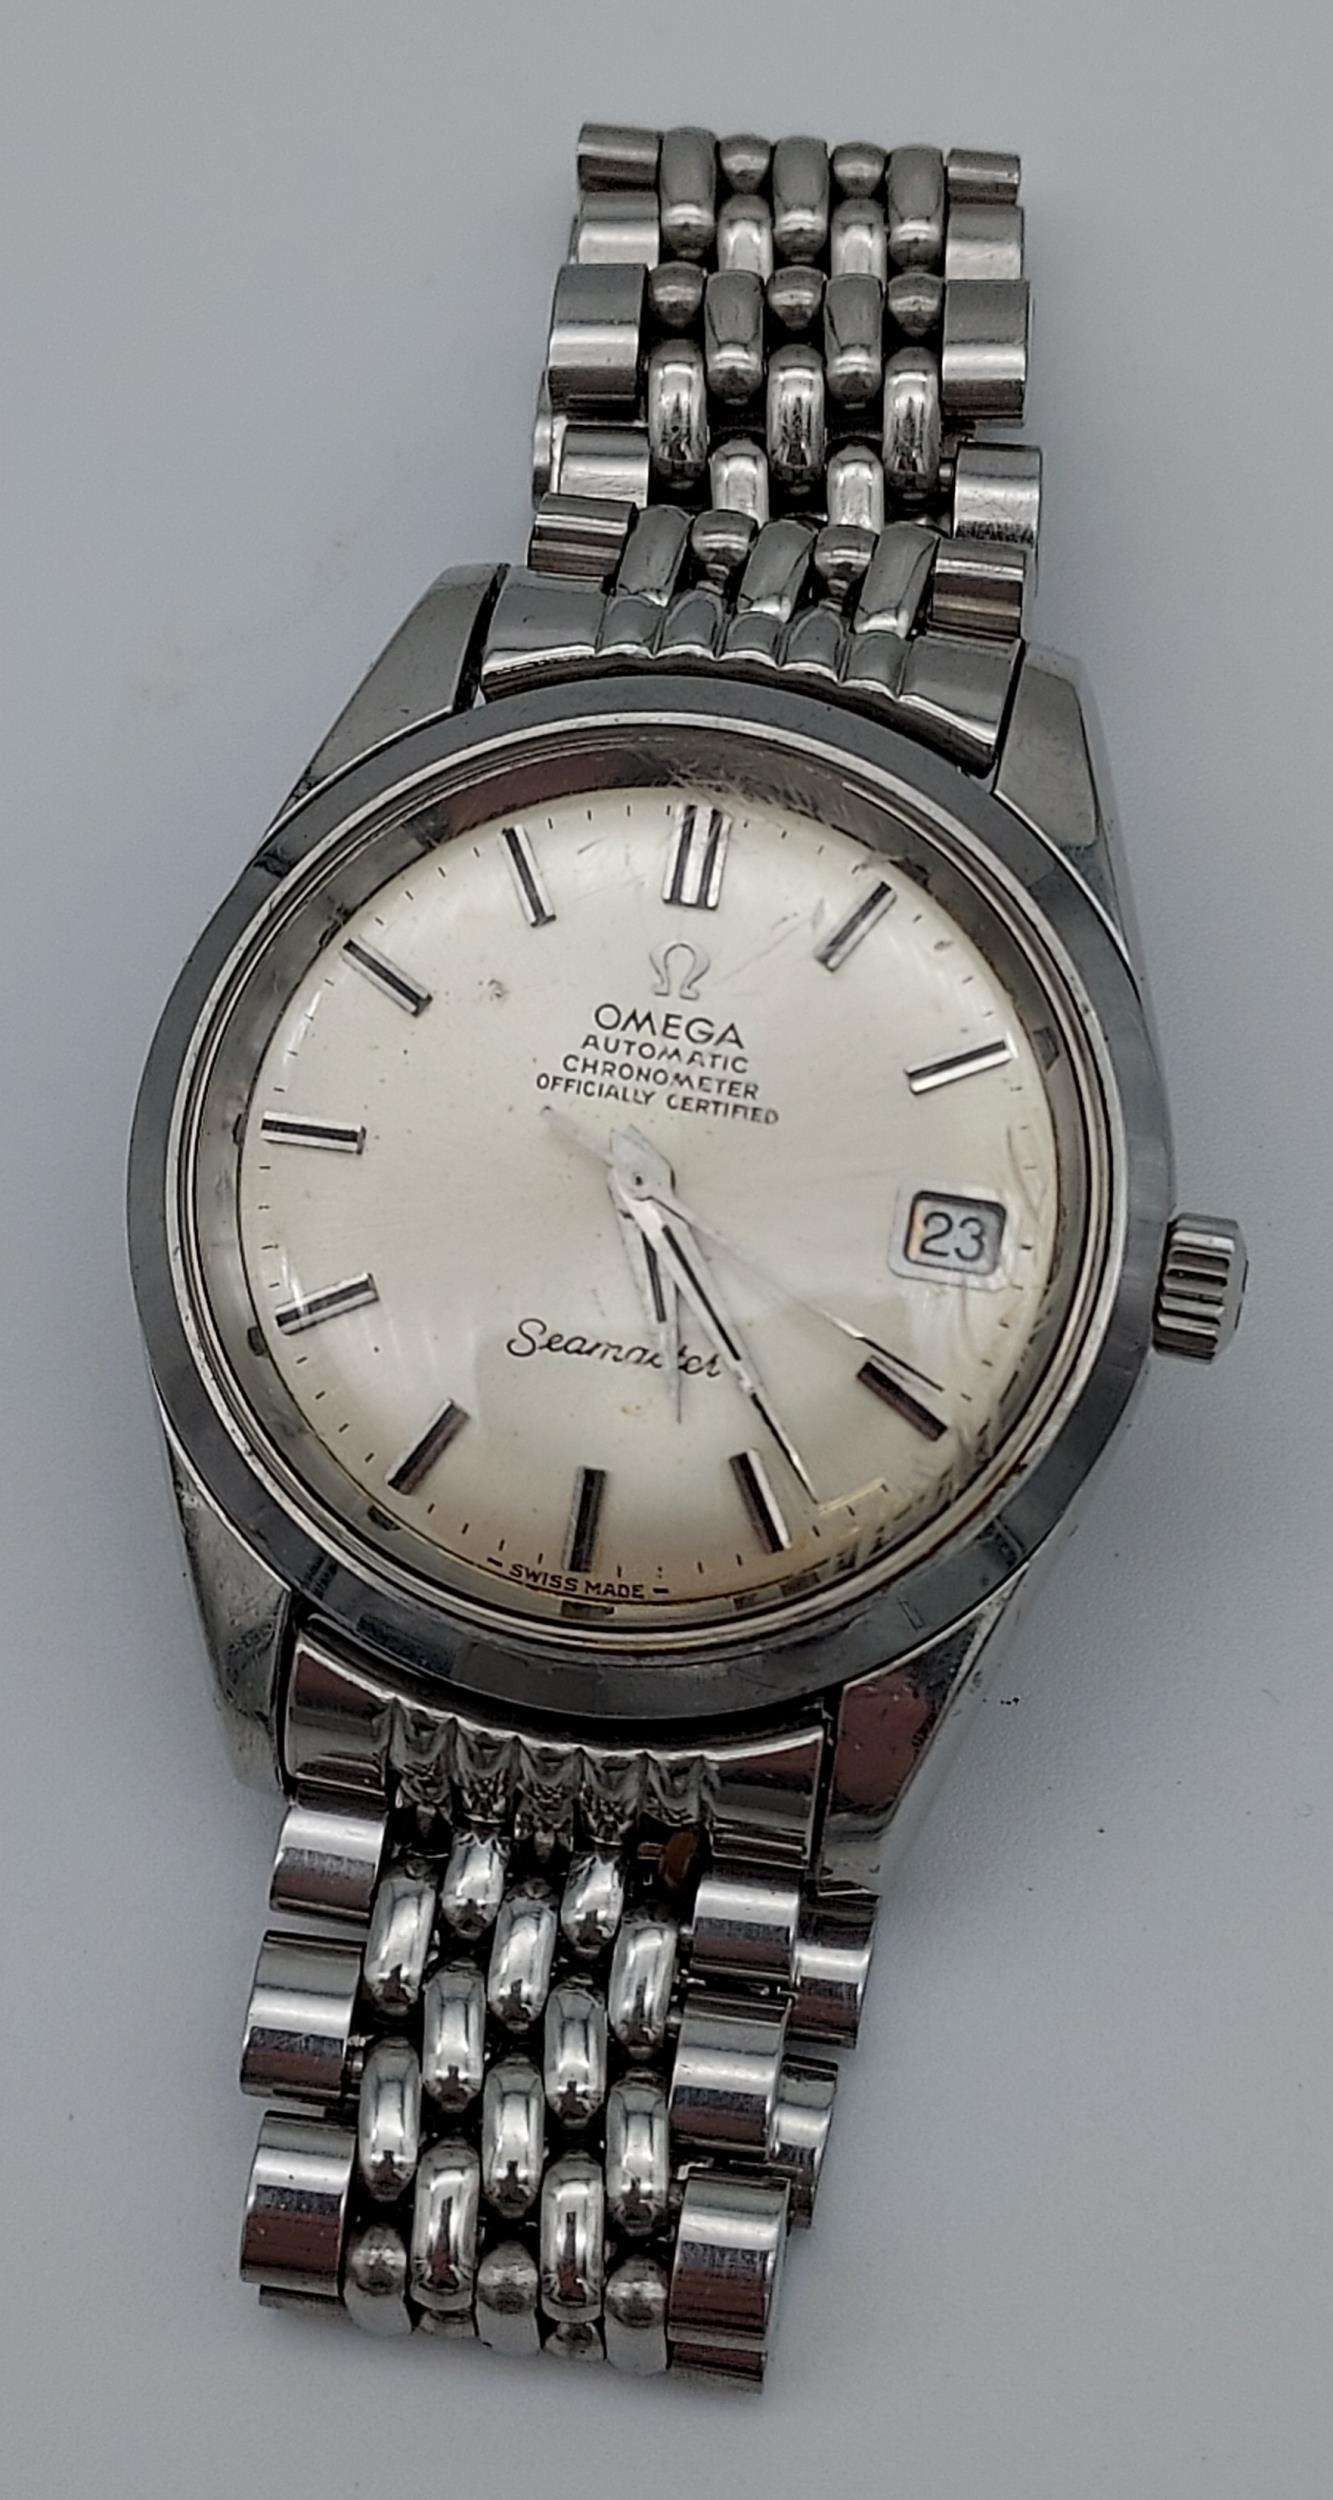 Gent's Vintage Omega Automatic Chronometer officially certified Seamaster watch. In a working